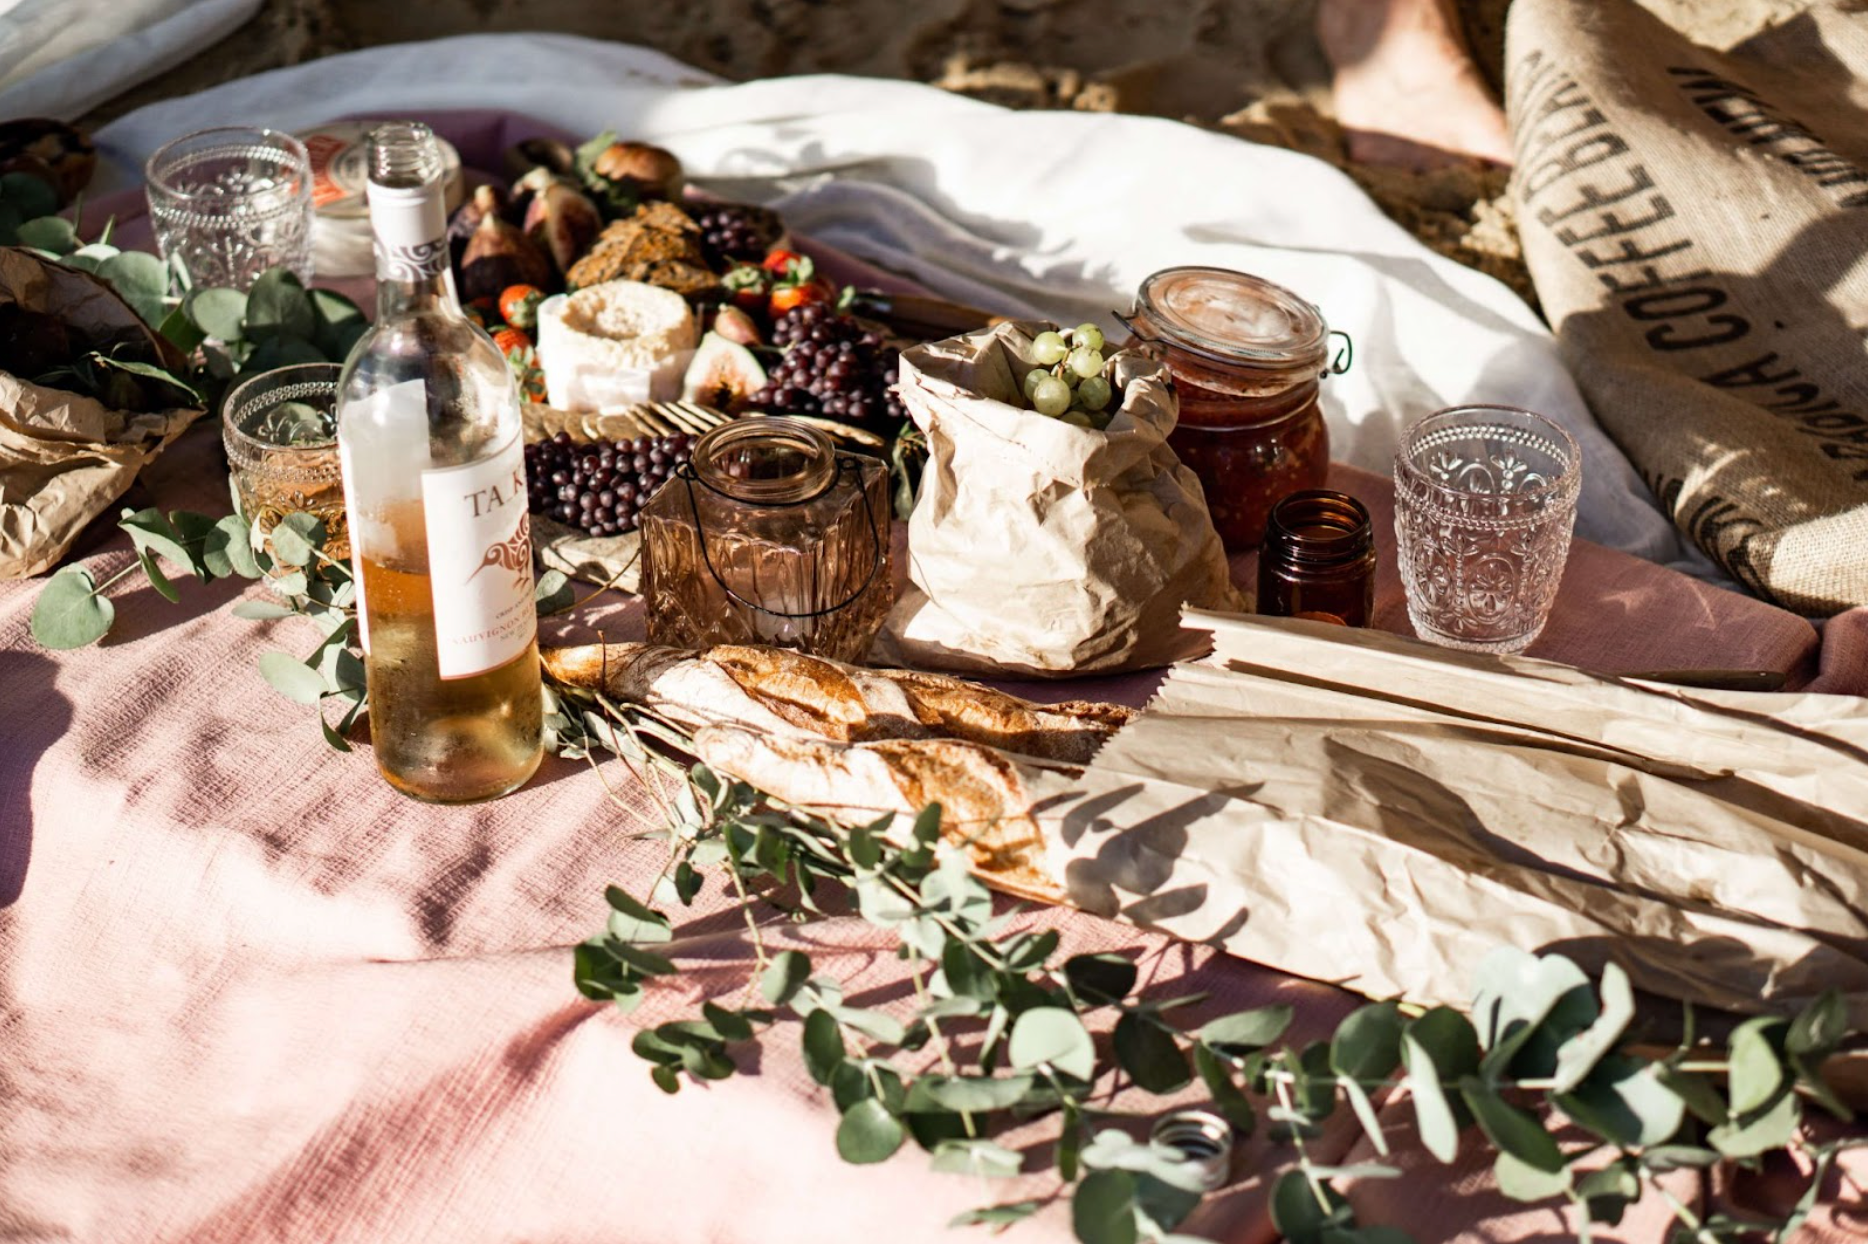 Picnic spread with wine and a blanket in the sun